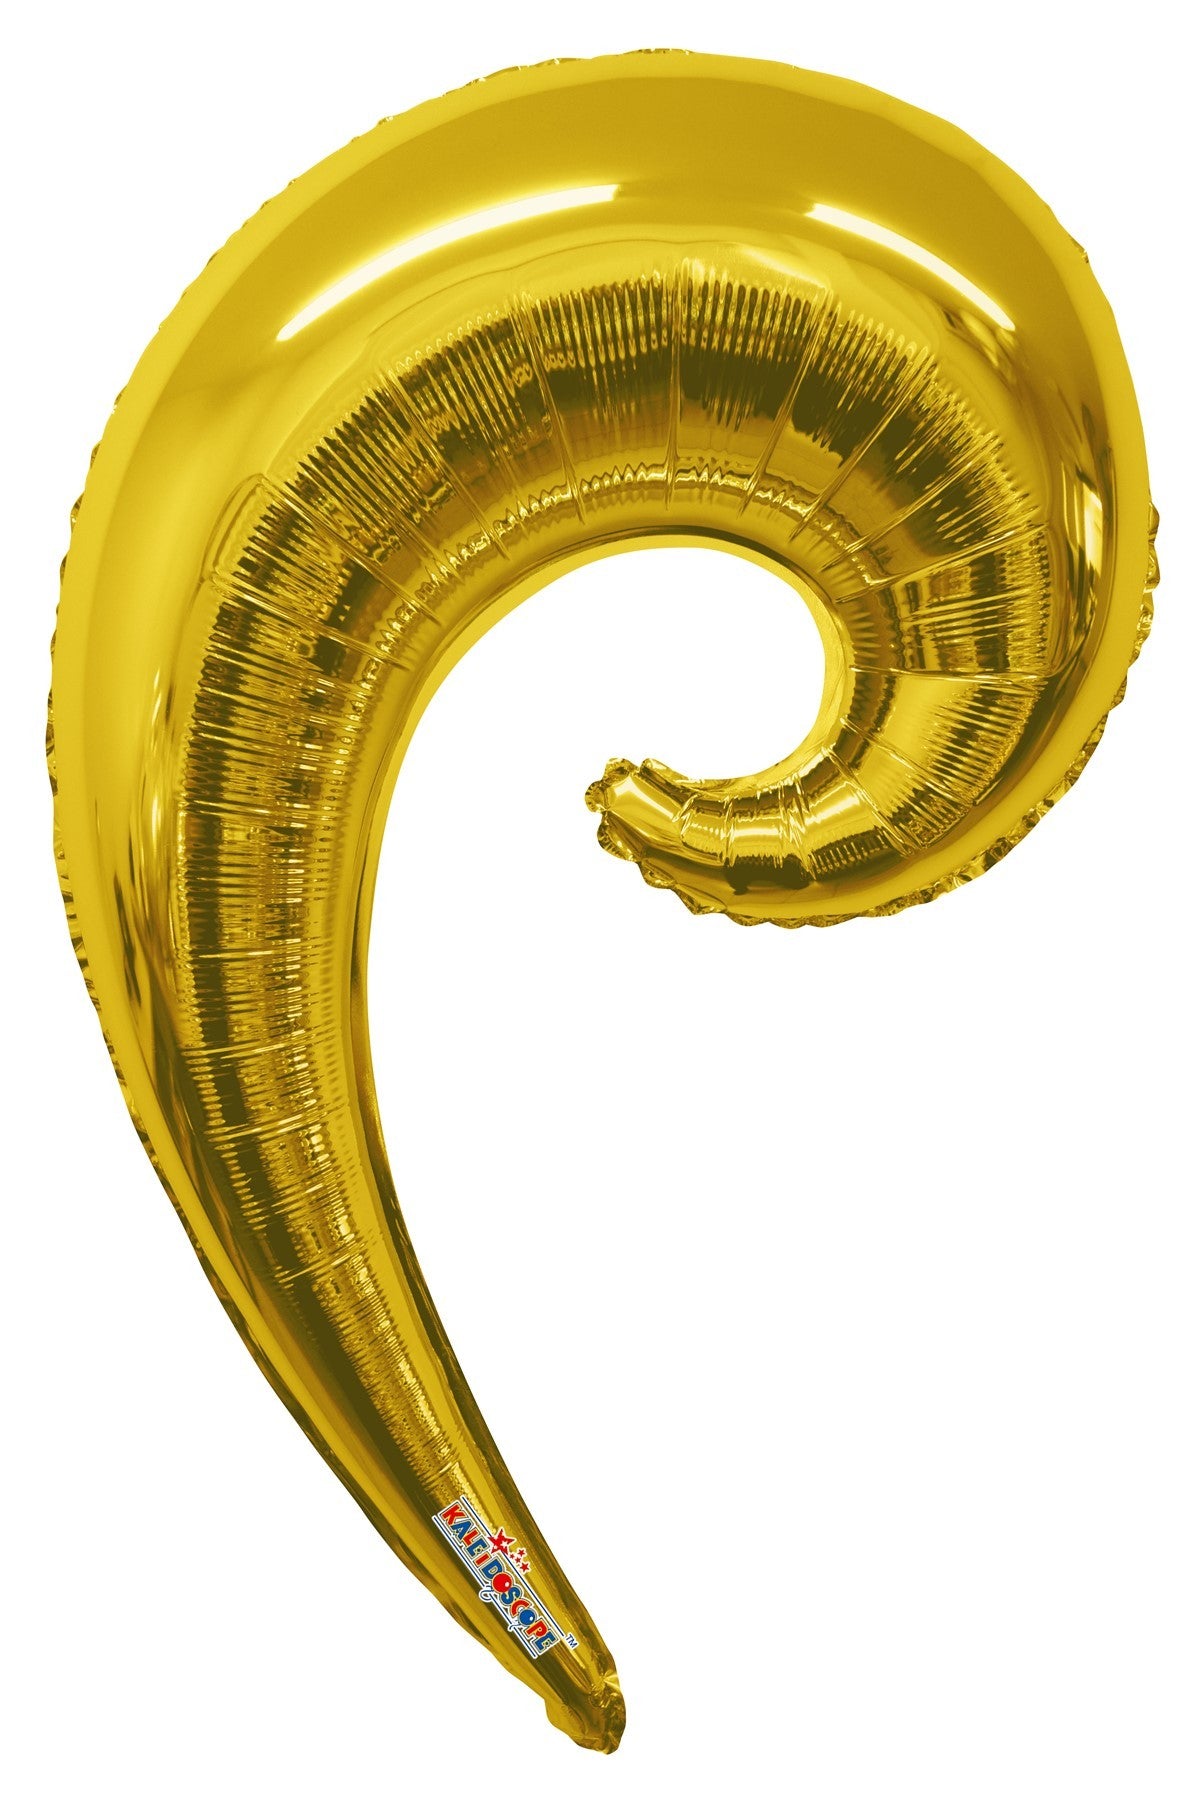 View Gold Wave Balloon 36 inch information